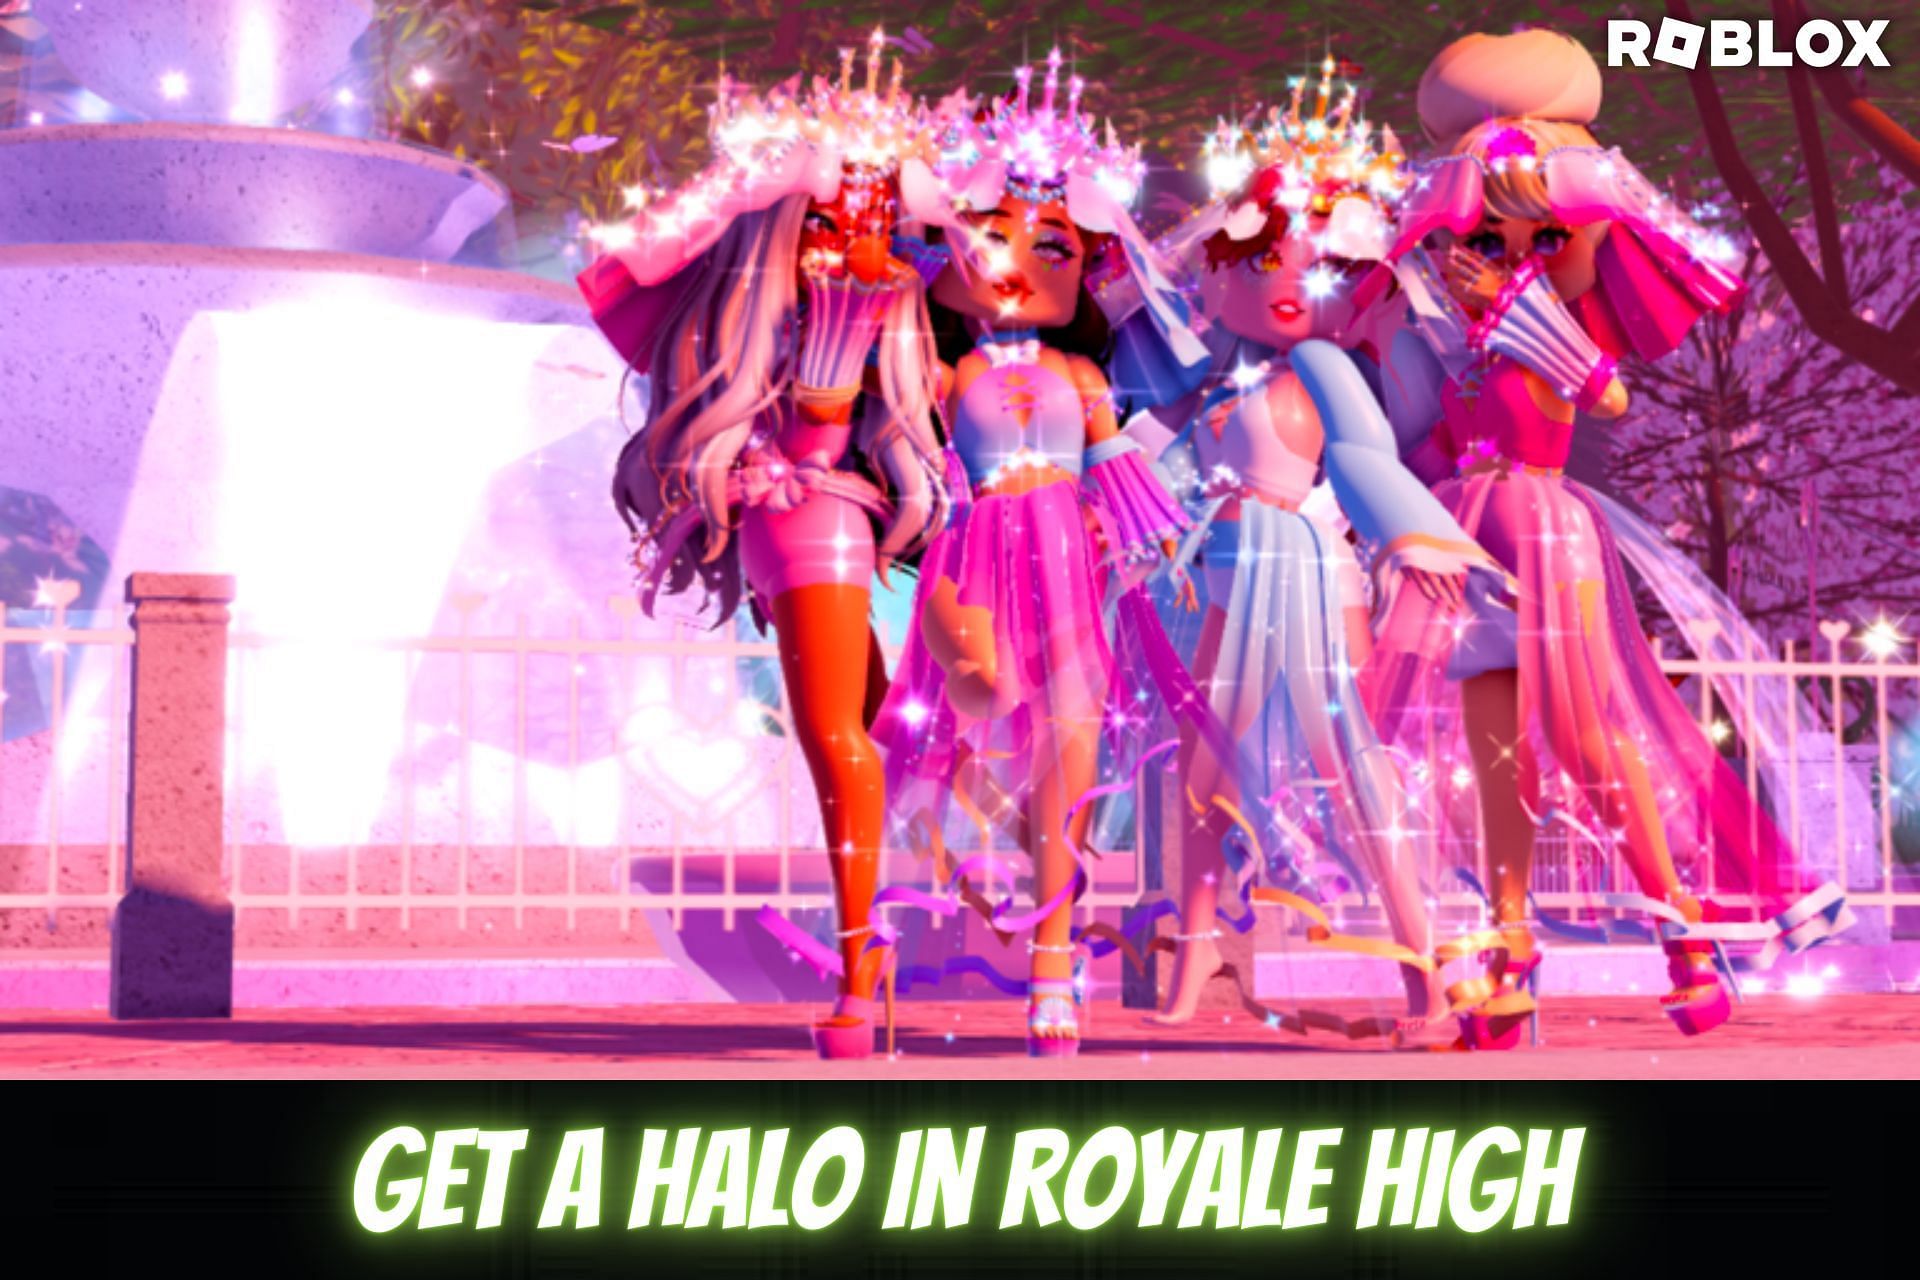 All Roblox Royale High Winter Halo Answers (2022) - Pro Game Guides